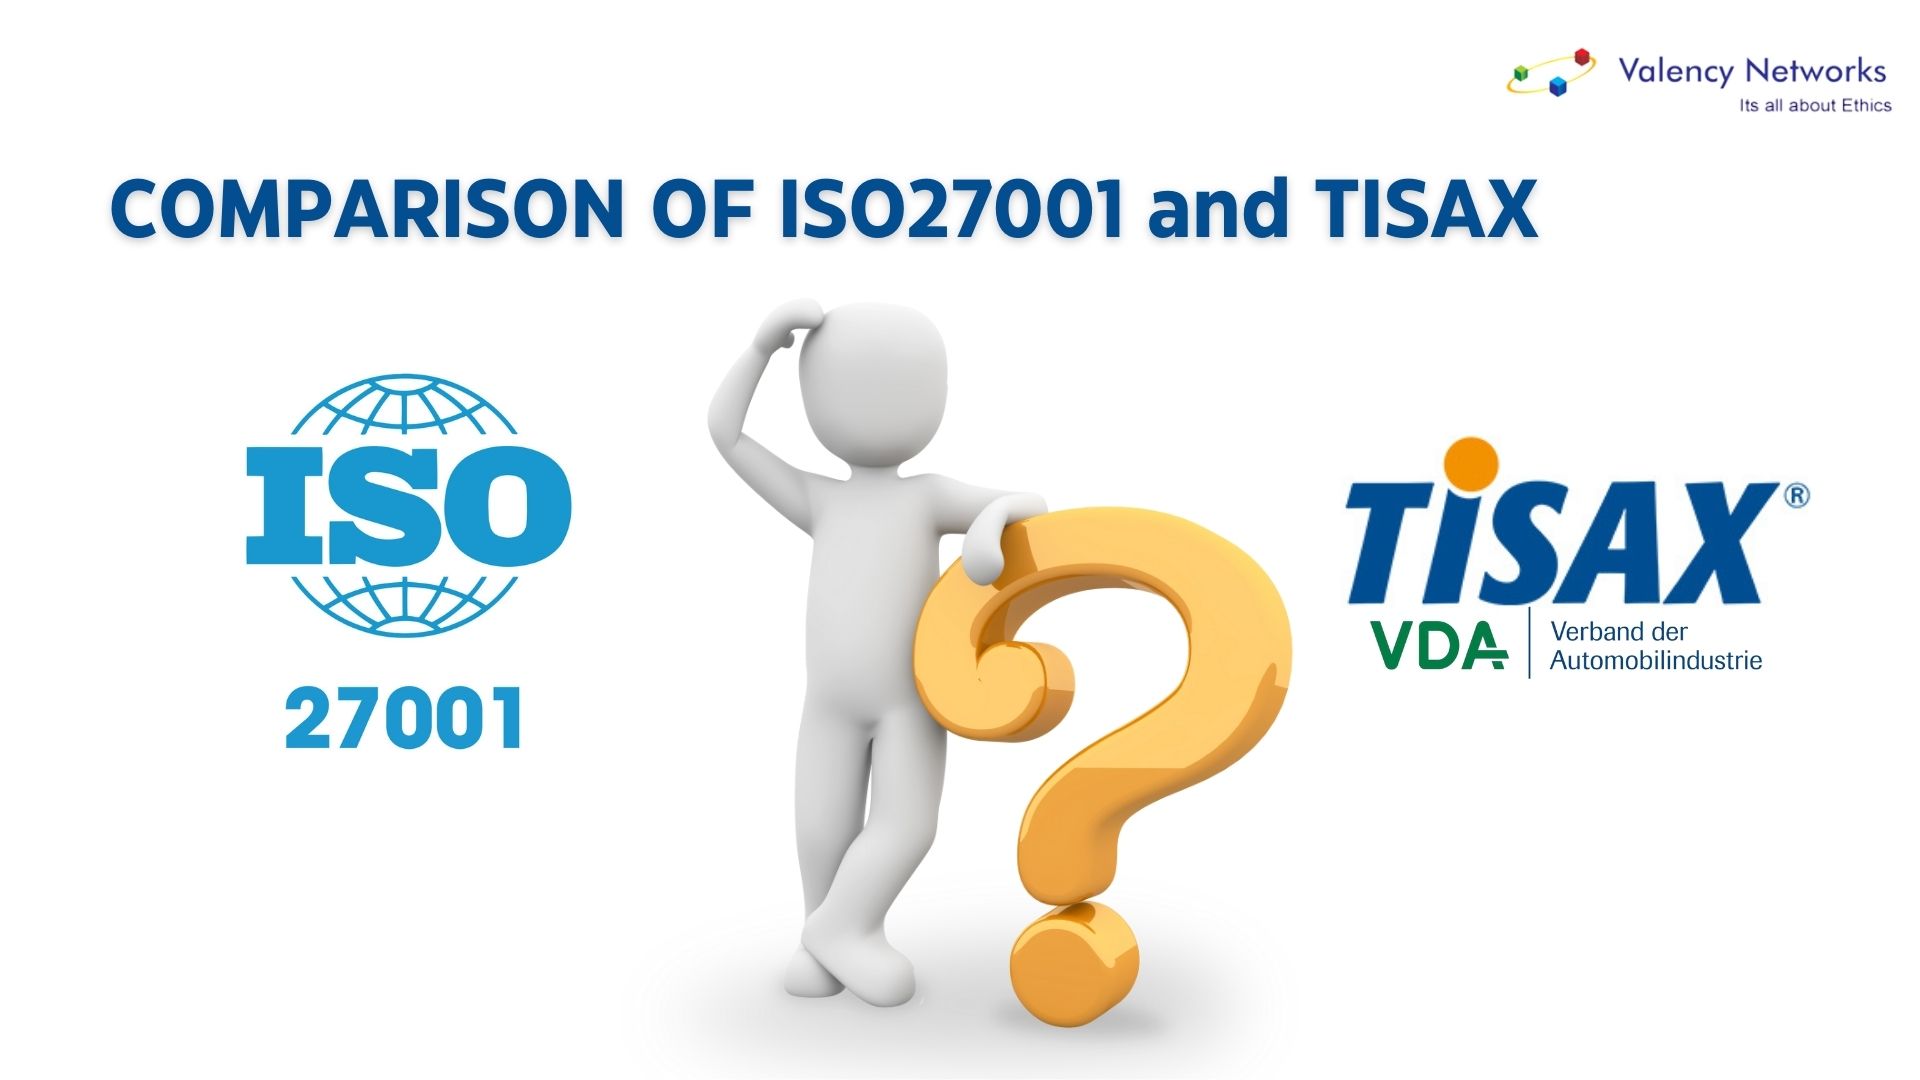 Comparison of ISO27001 and TISAX